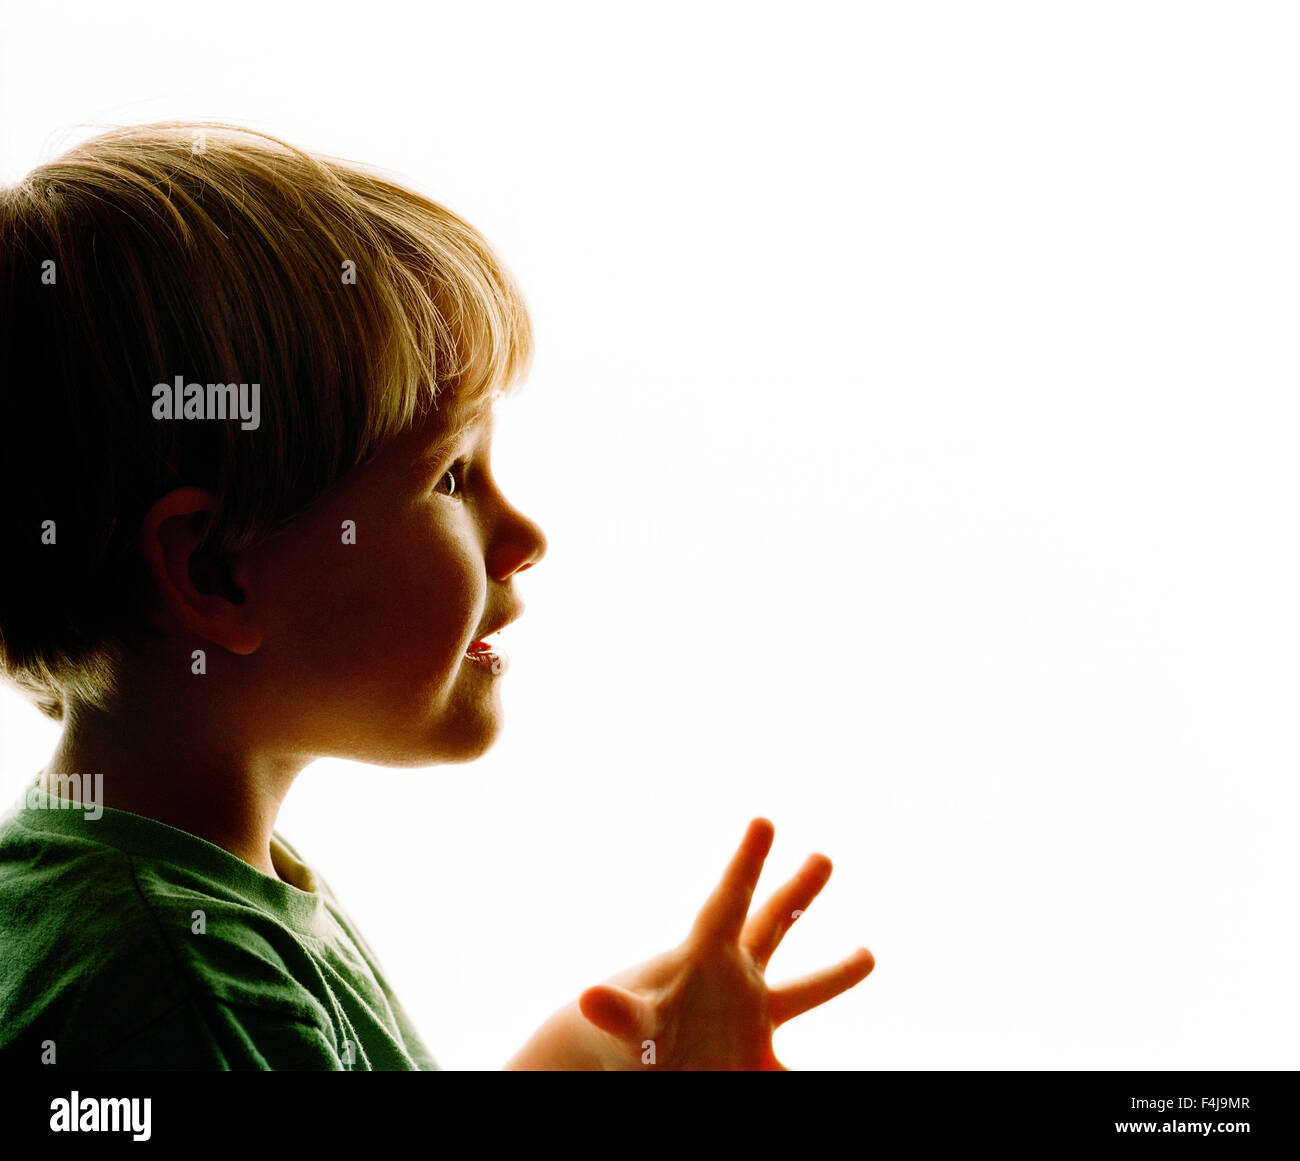 A child against white background. Stock Photo